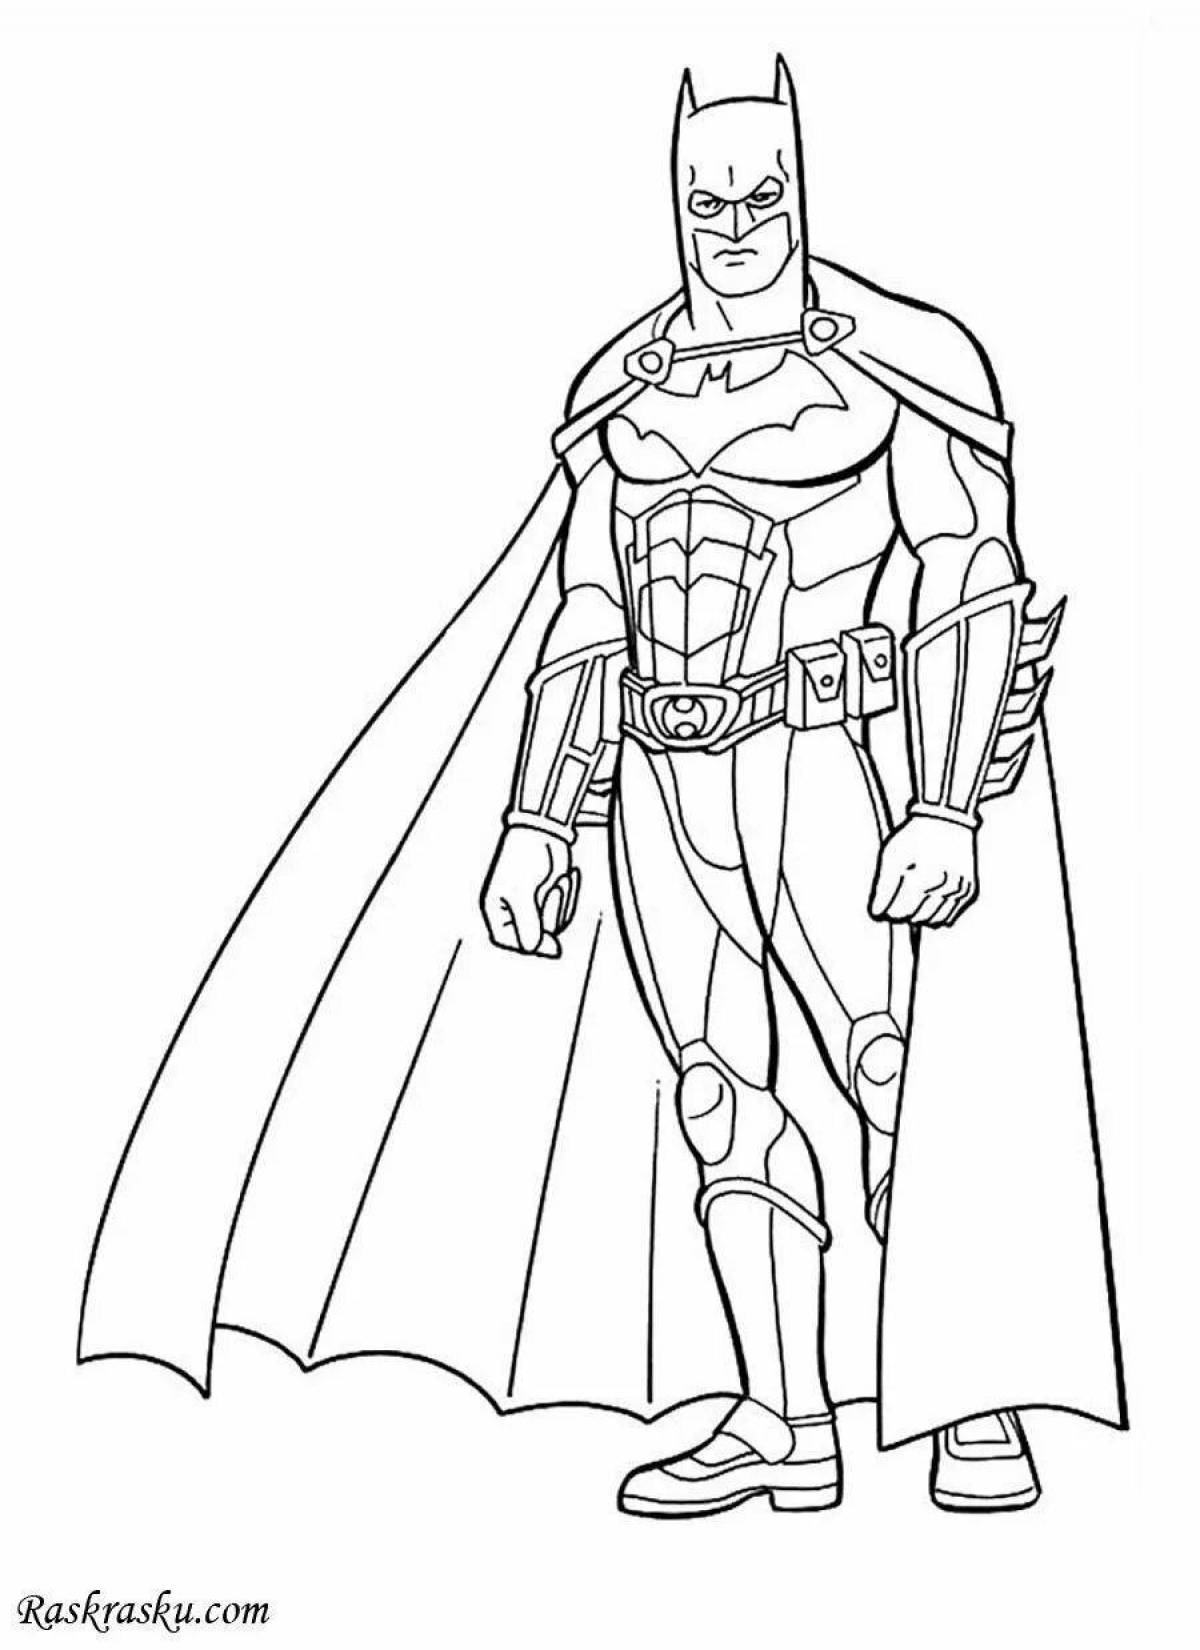 Amazing coloring book for hero boys